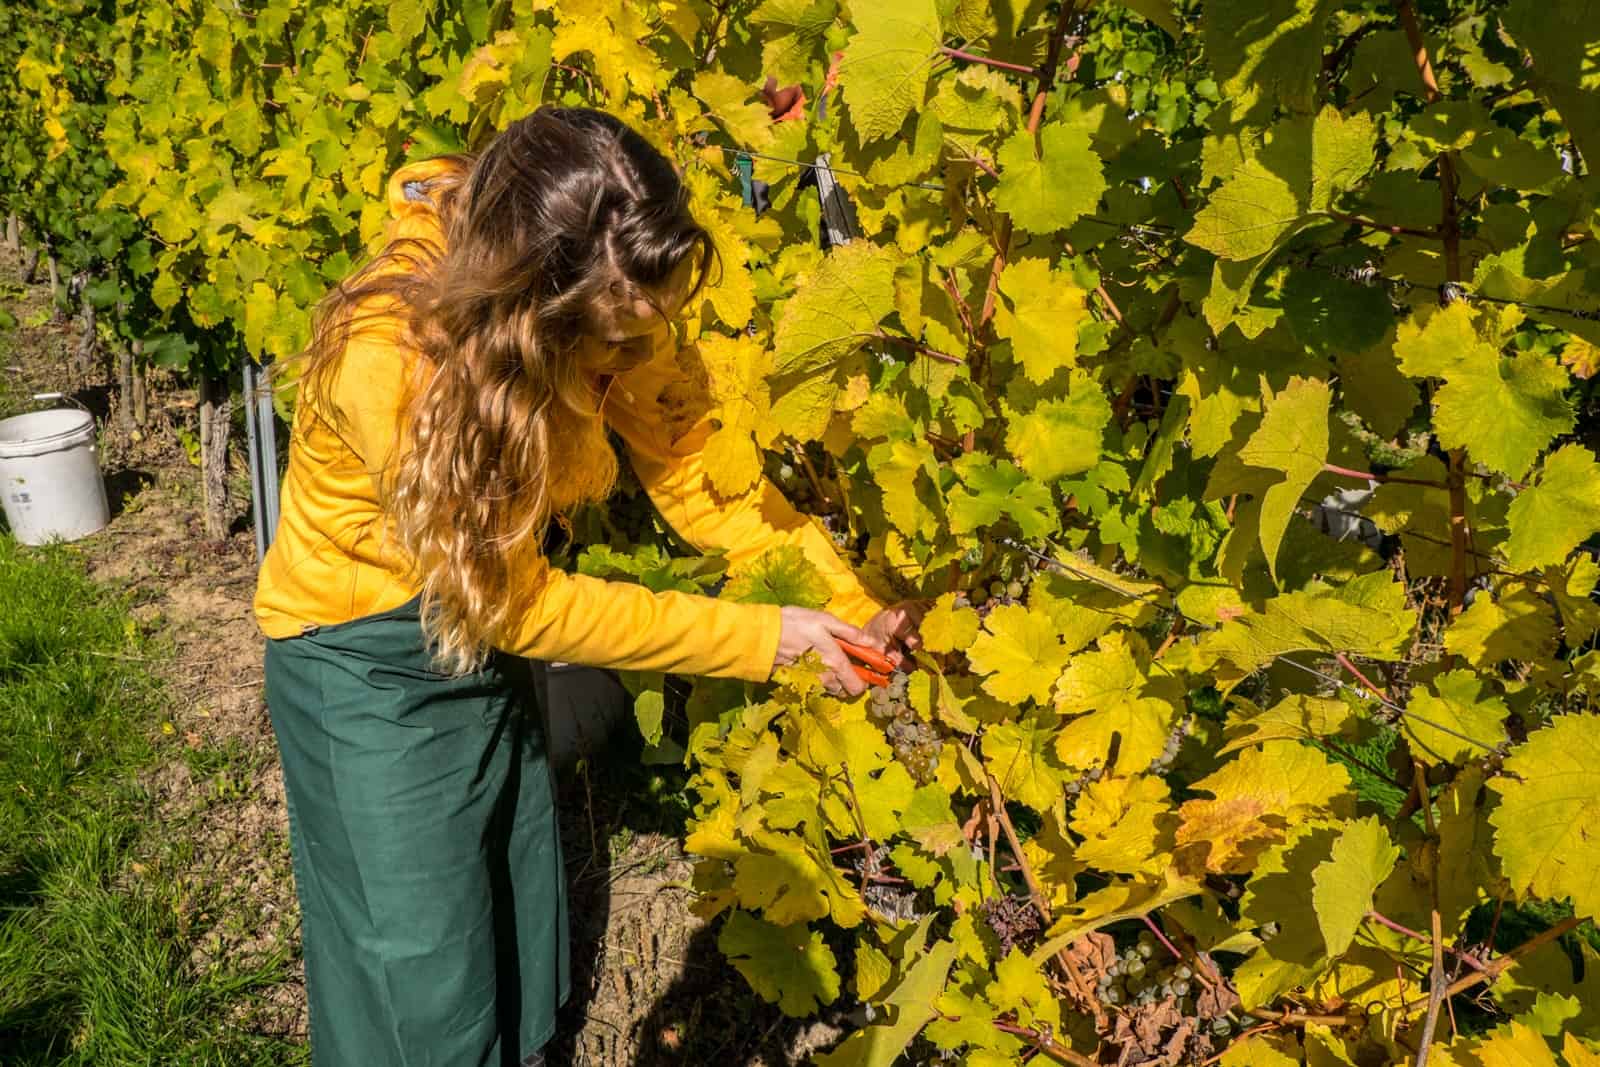 A woman in a yellow jacket and green apron cuts grapes from within a mass of yellow leaves on a tall vine